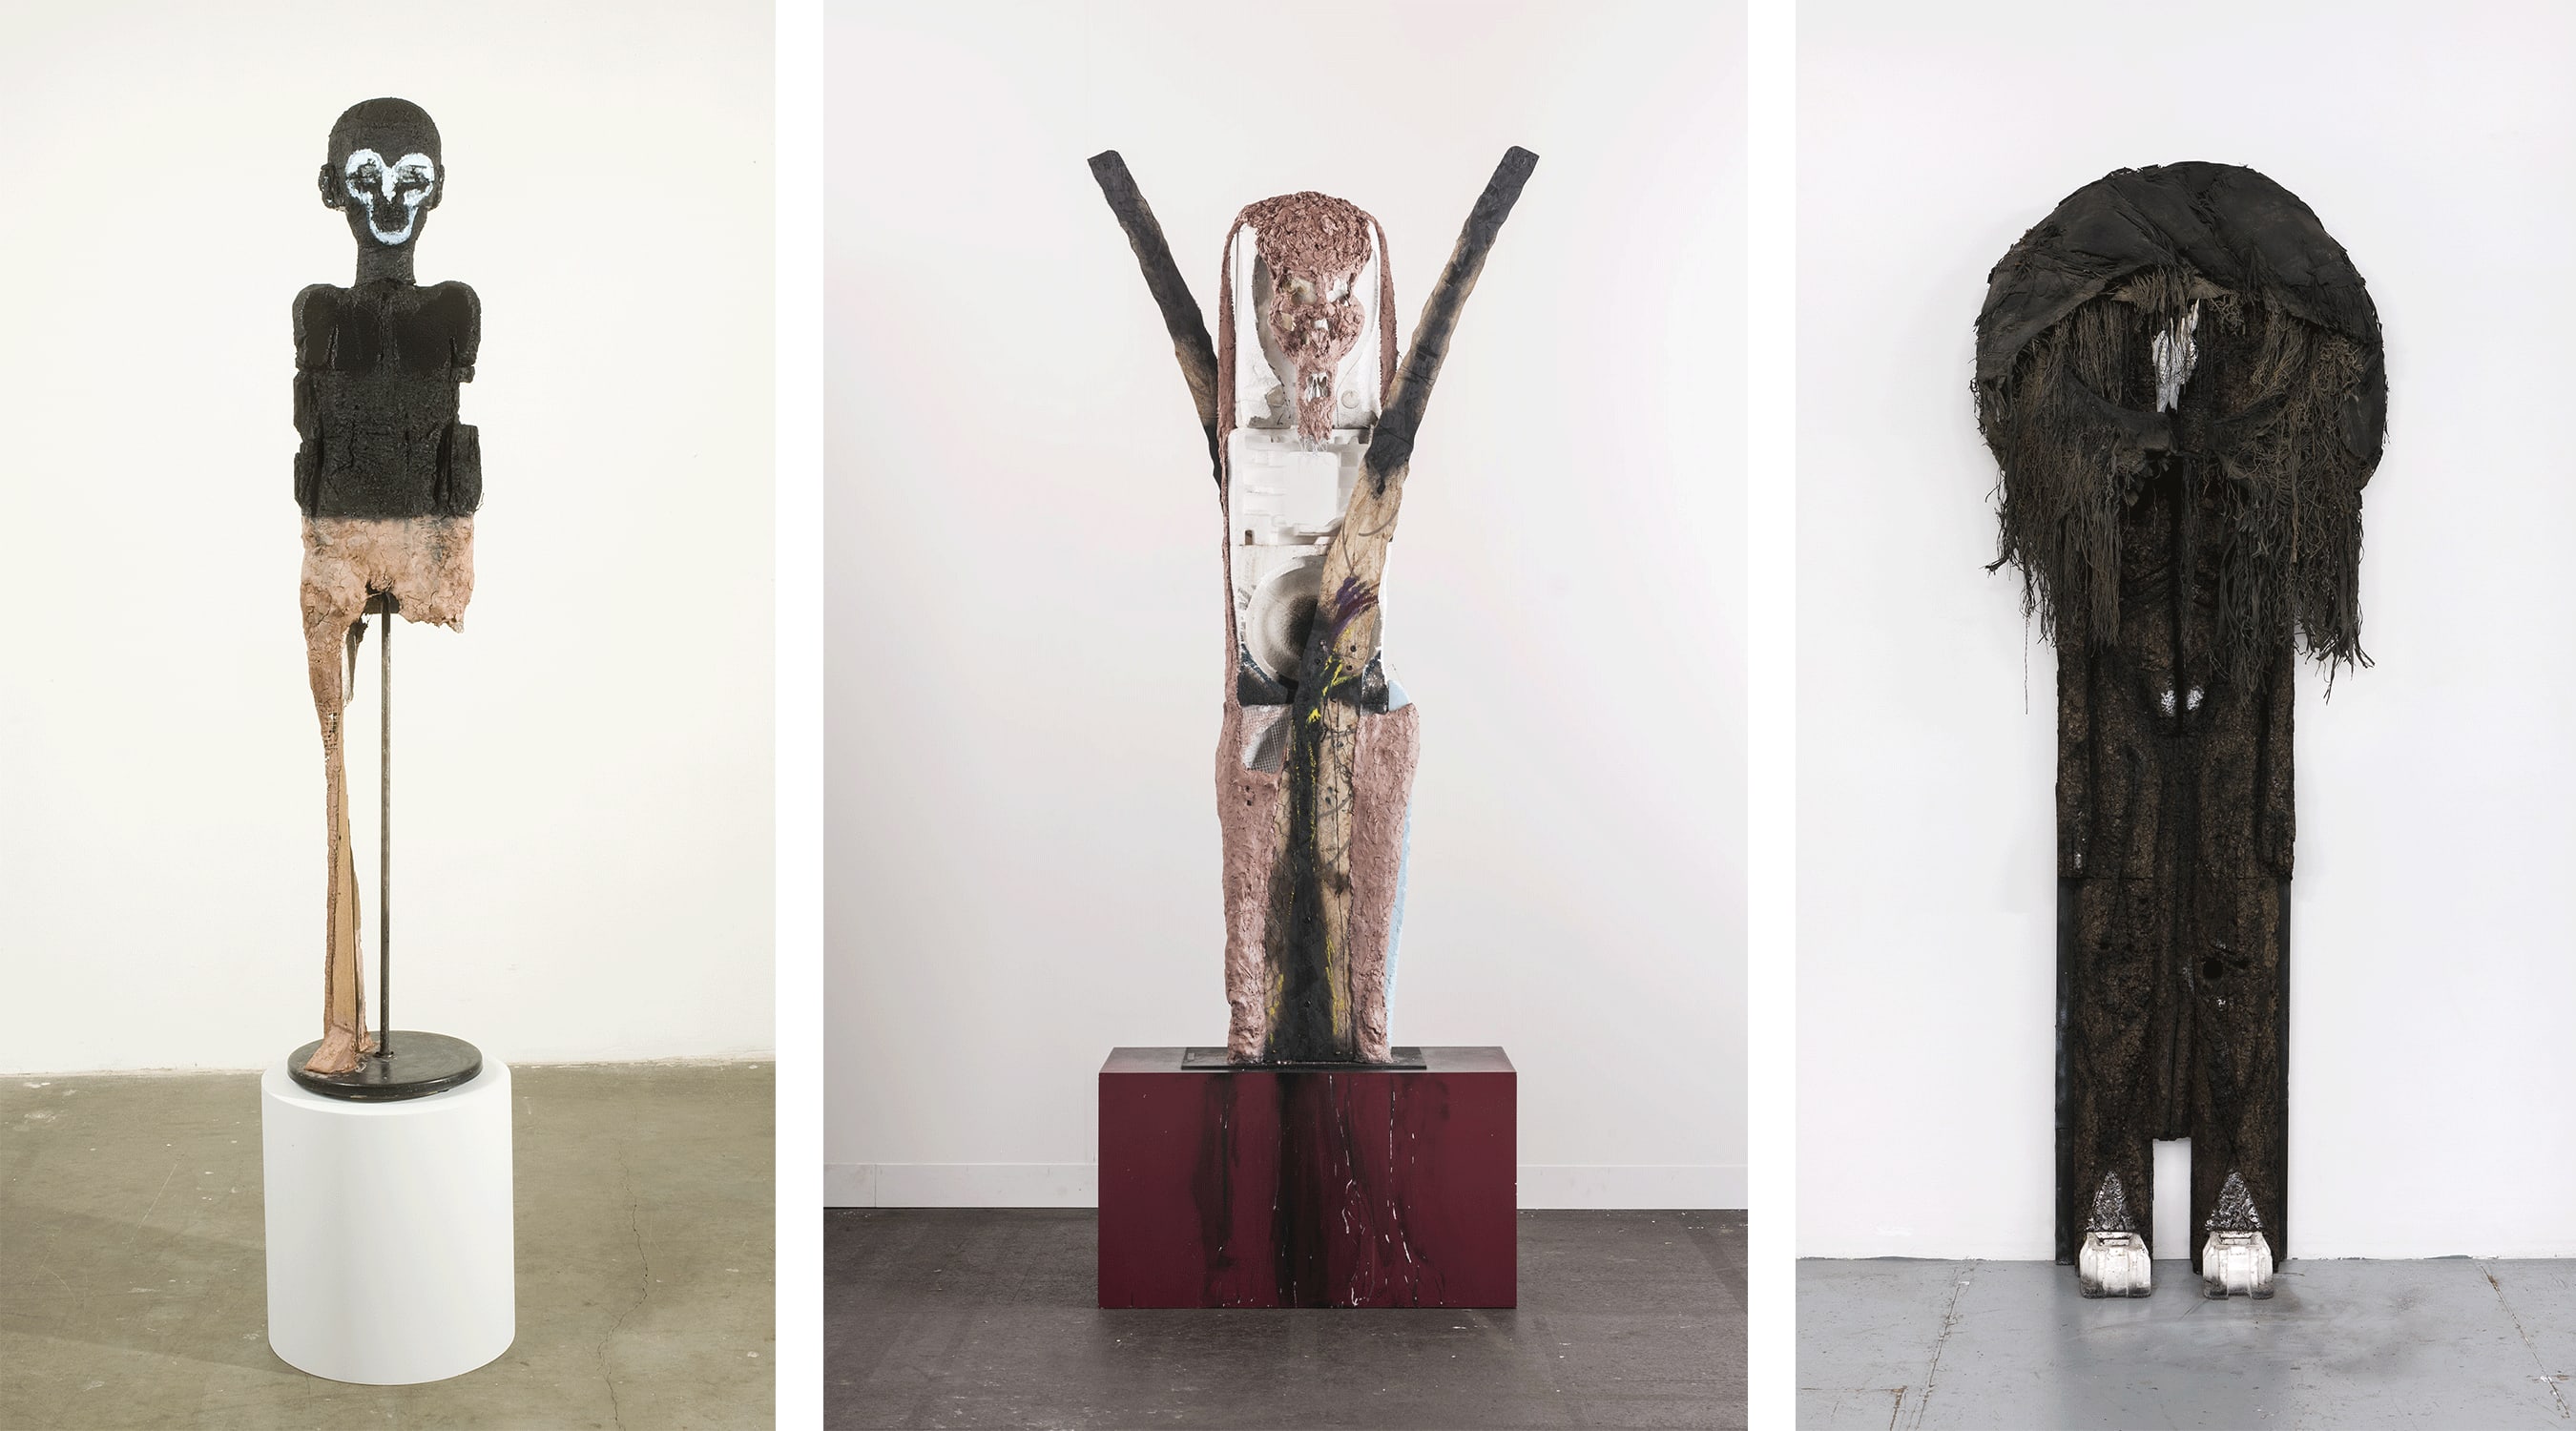 Artworks by Huma Bhabha. From left to right: 1. Bourne Darkly, 2008. Private collection. Courtesy of the artist and David Zwirner 2. Vessel, 2014. ProWinko ProArt Collection. 3. The Past is a Foreign Country, 2019. Courtesy of the artist and David Zwirner.